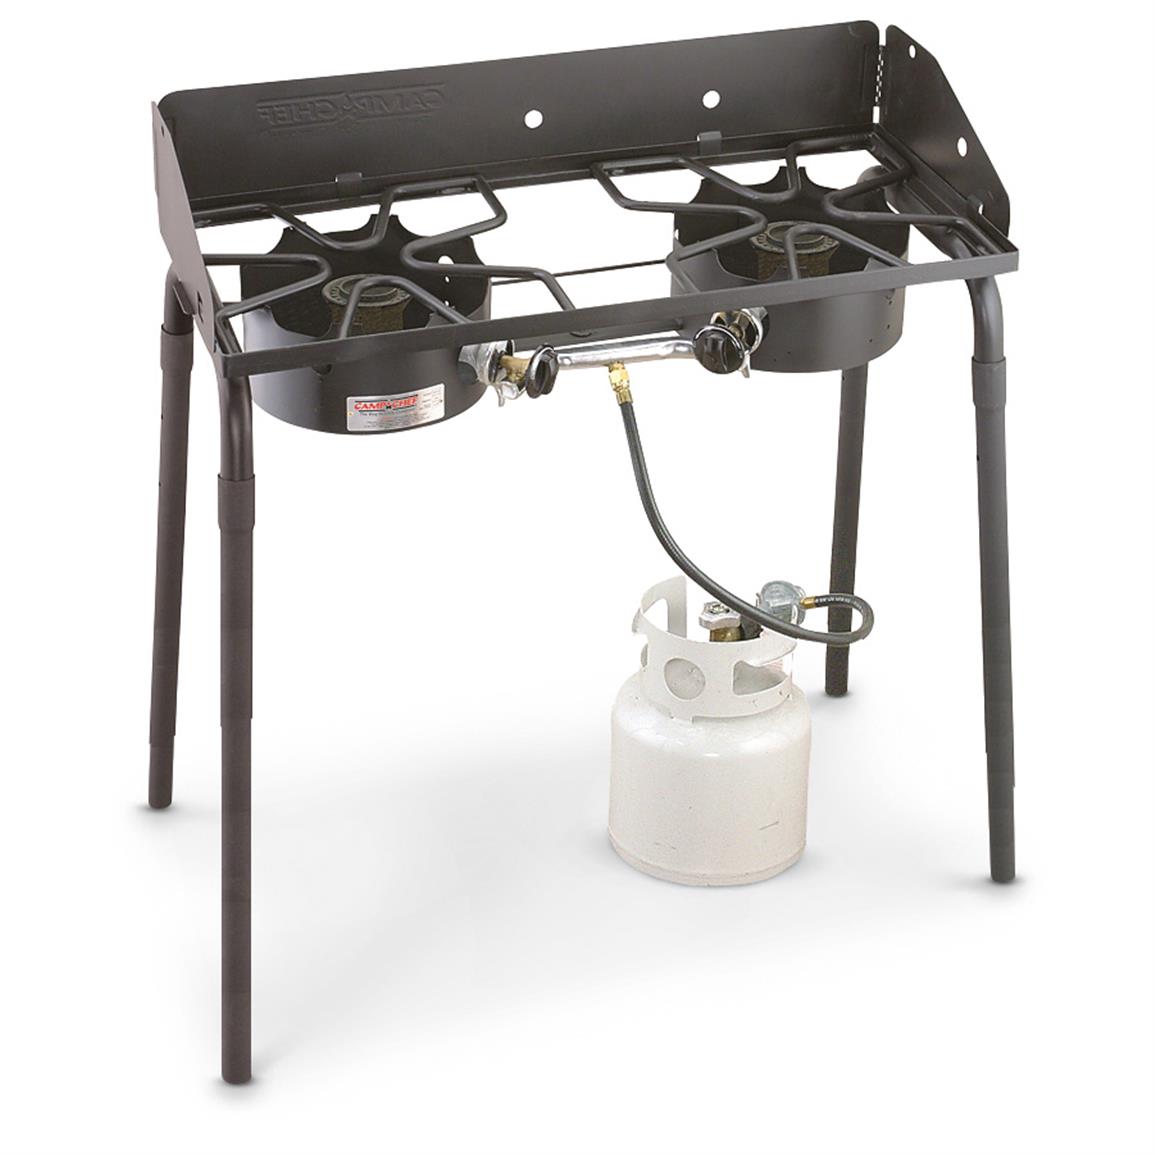 Creatice Best Two Burner Camp Stove 